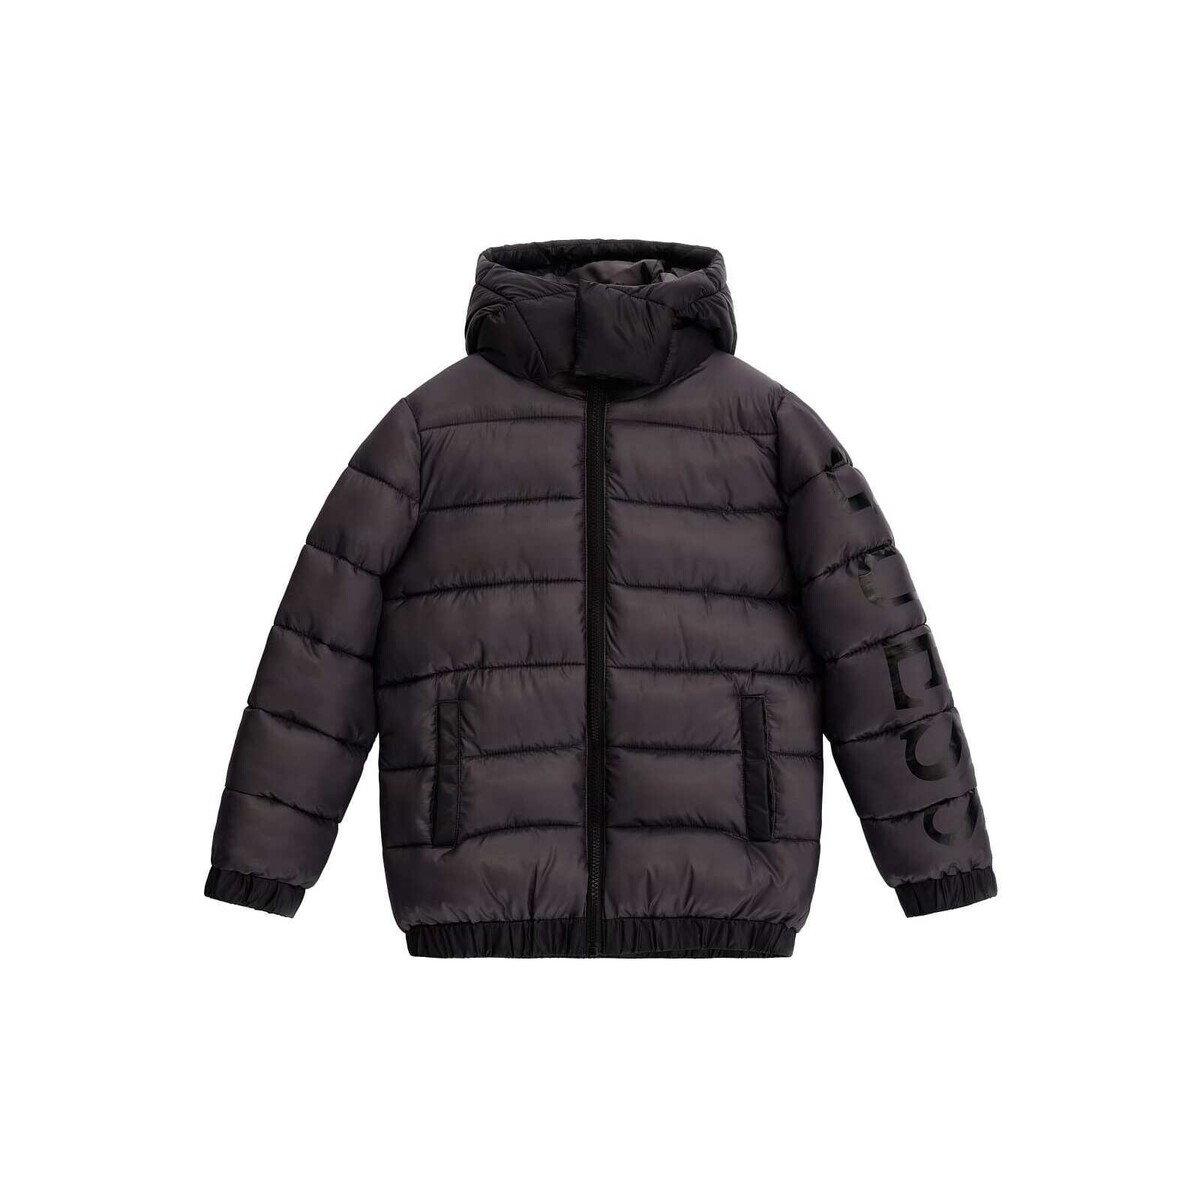 Guess L3BL10 Grey - Free delivery | Spartoo NET ! - Clothing Duffel coats  Child